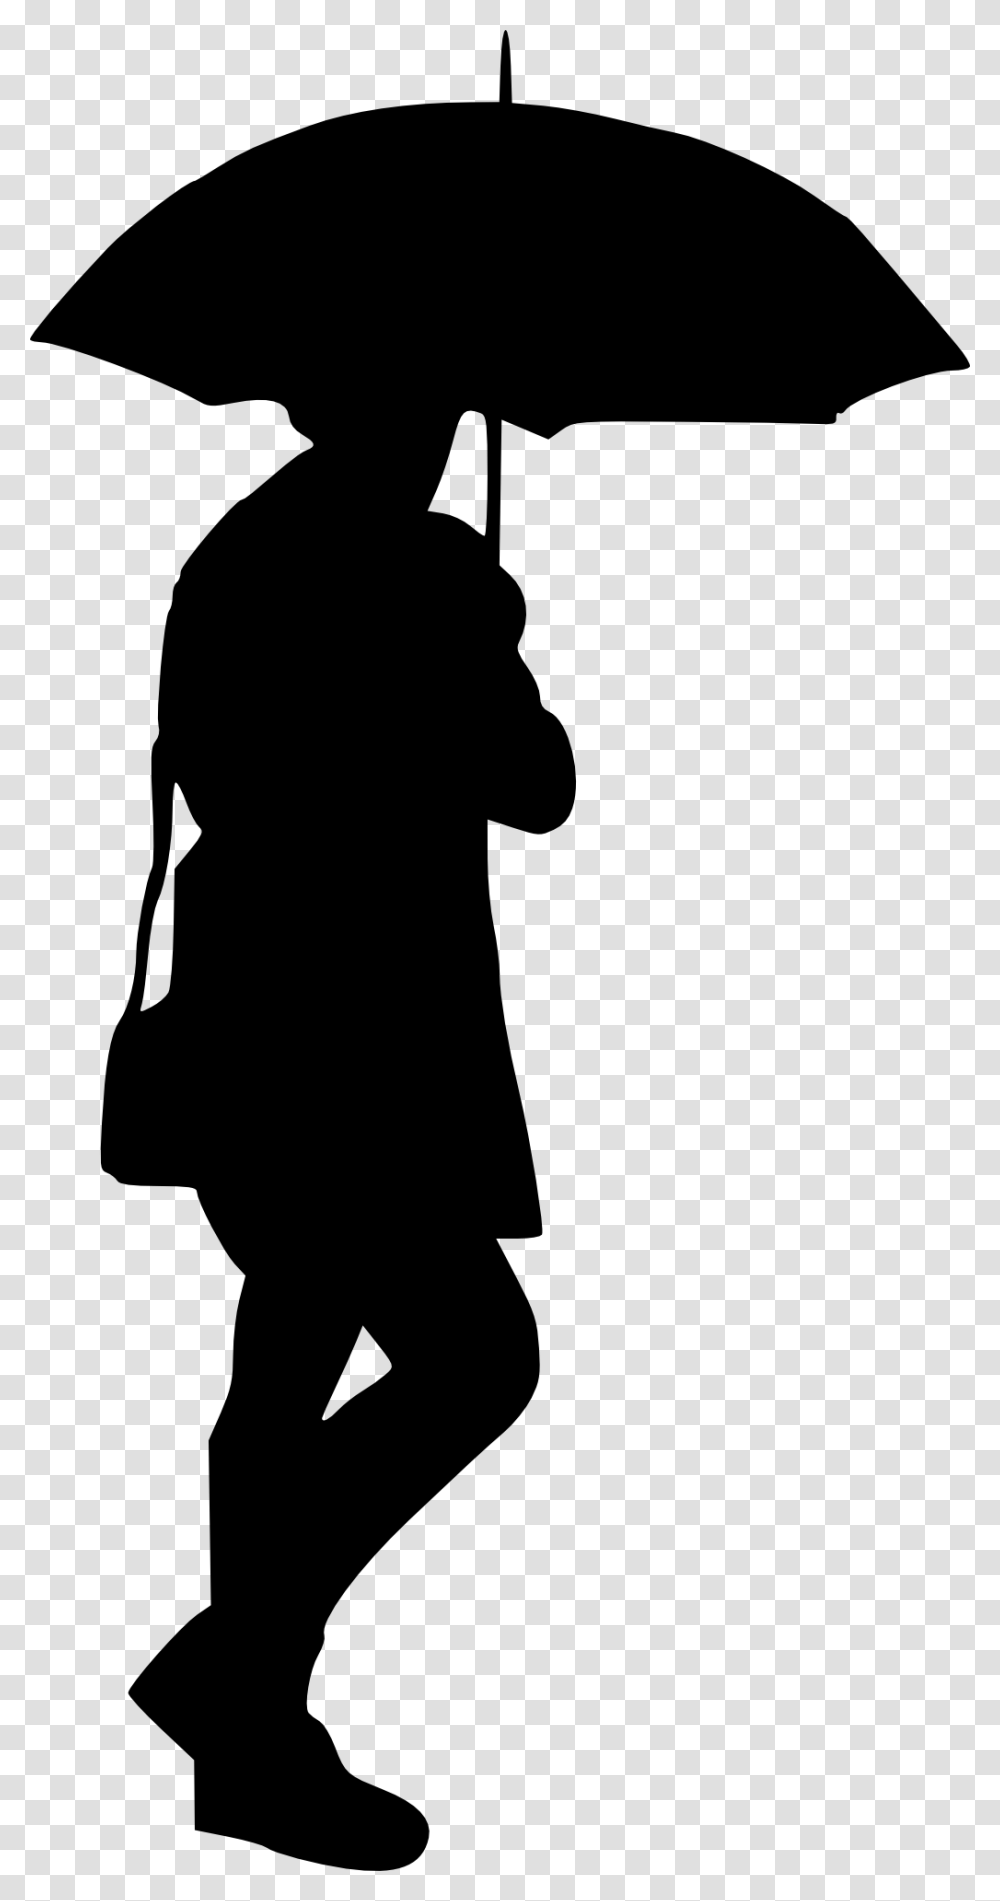 Woman With Umbrella Silhouette Silhouette Person With Umbrella, Human, Standing, Kneeling, Photography Transparent Png